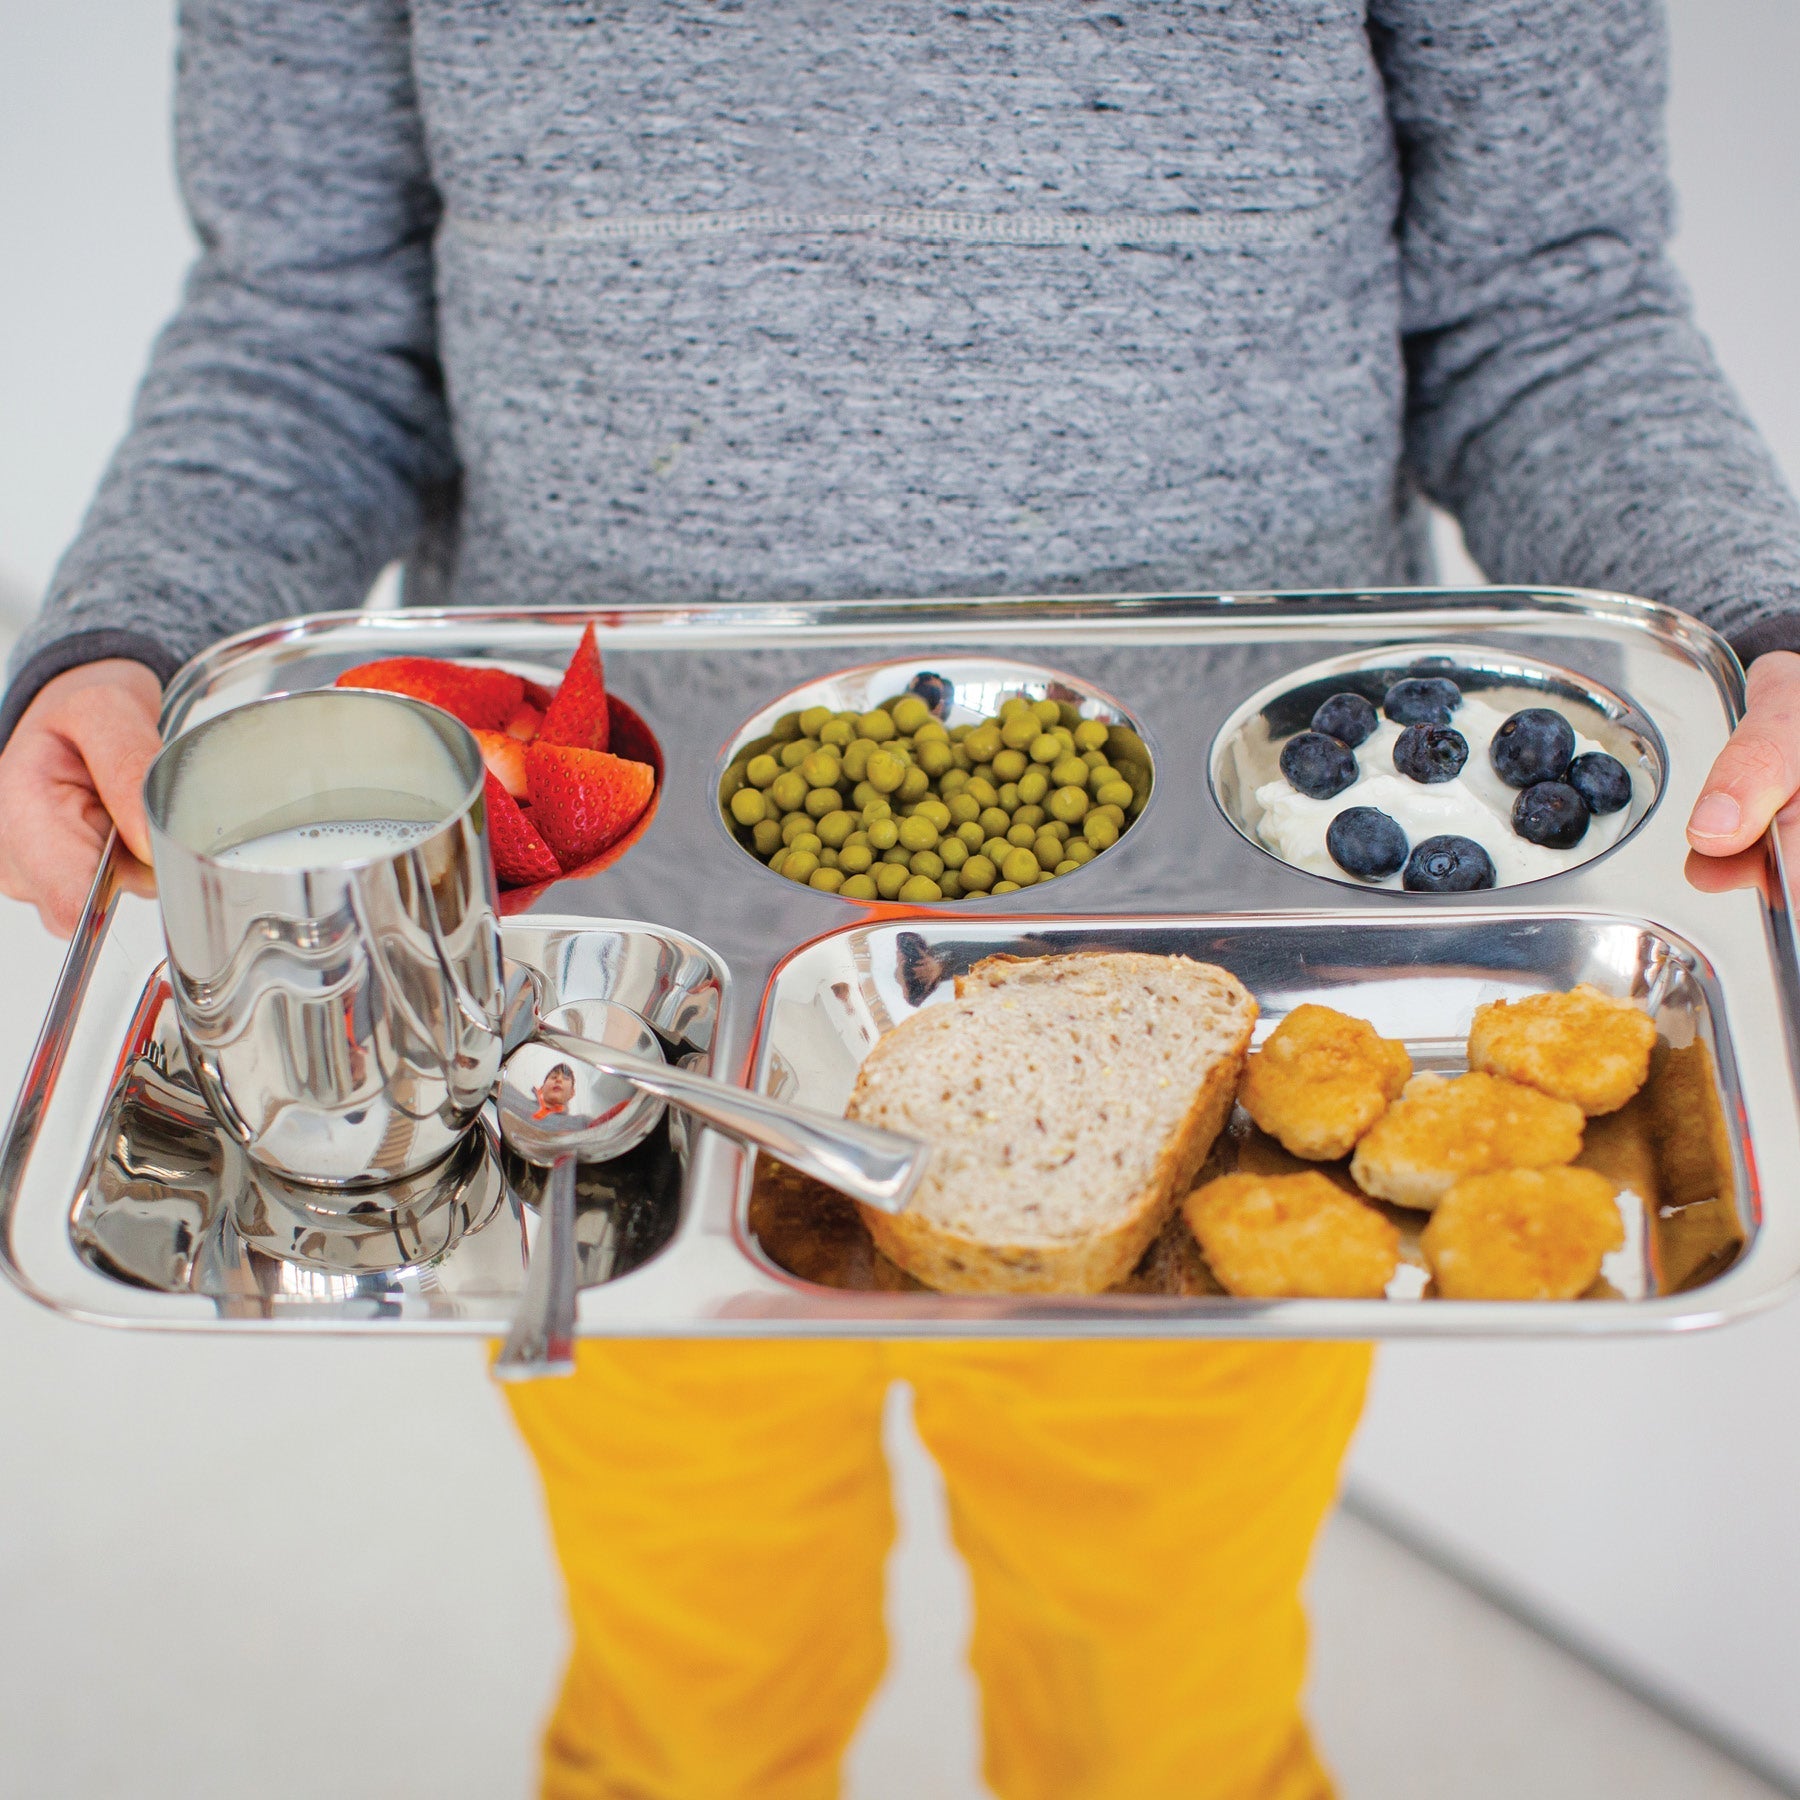 Child with stainless steel cafeteria tray